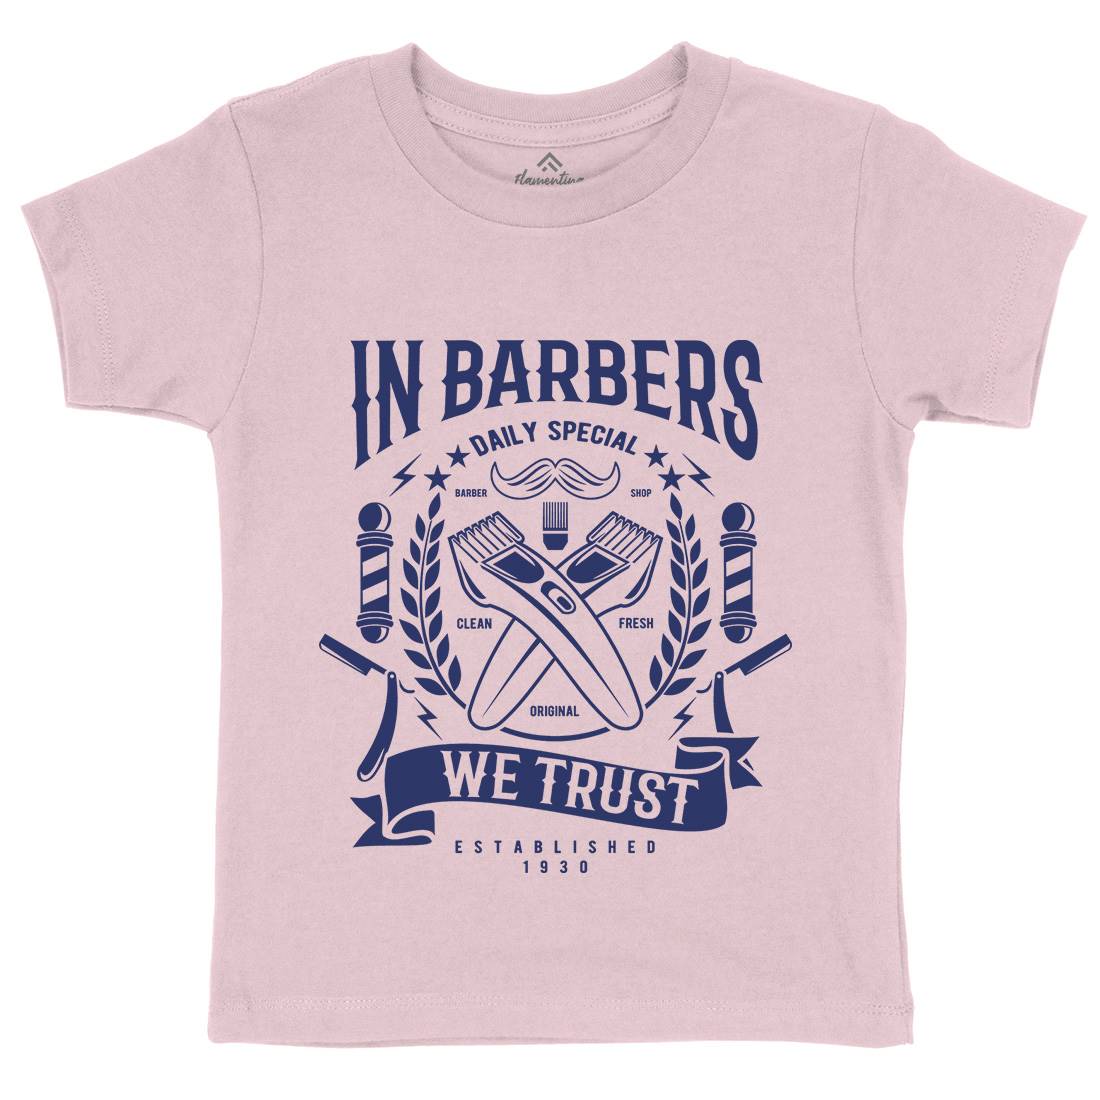 In Barbers We Trust Kids Crew Neck T-Shirt Barber A070